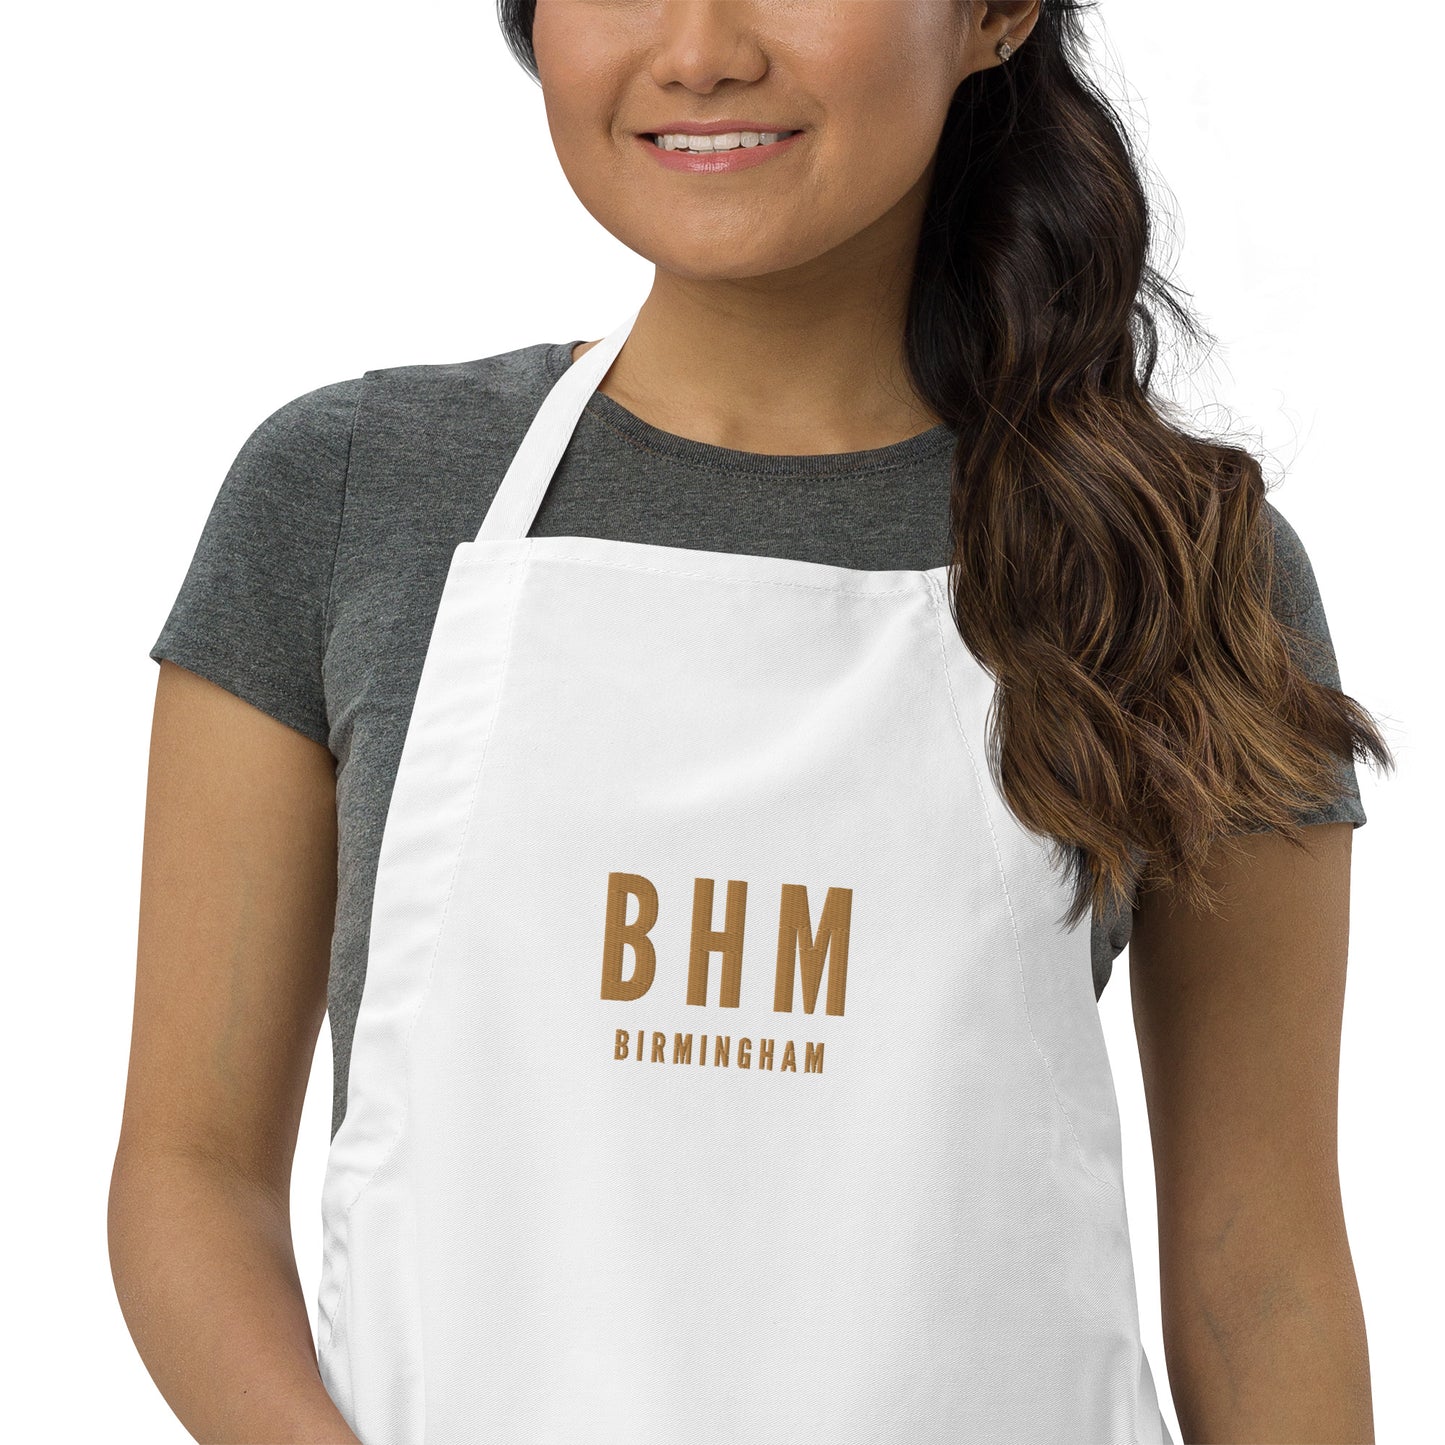 City Embroidered Apron - Old Gold • BHM Birmingham • YHM Designs - Image 08